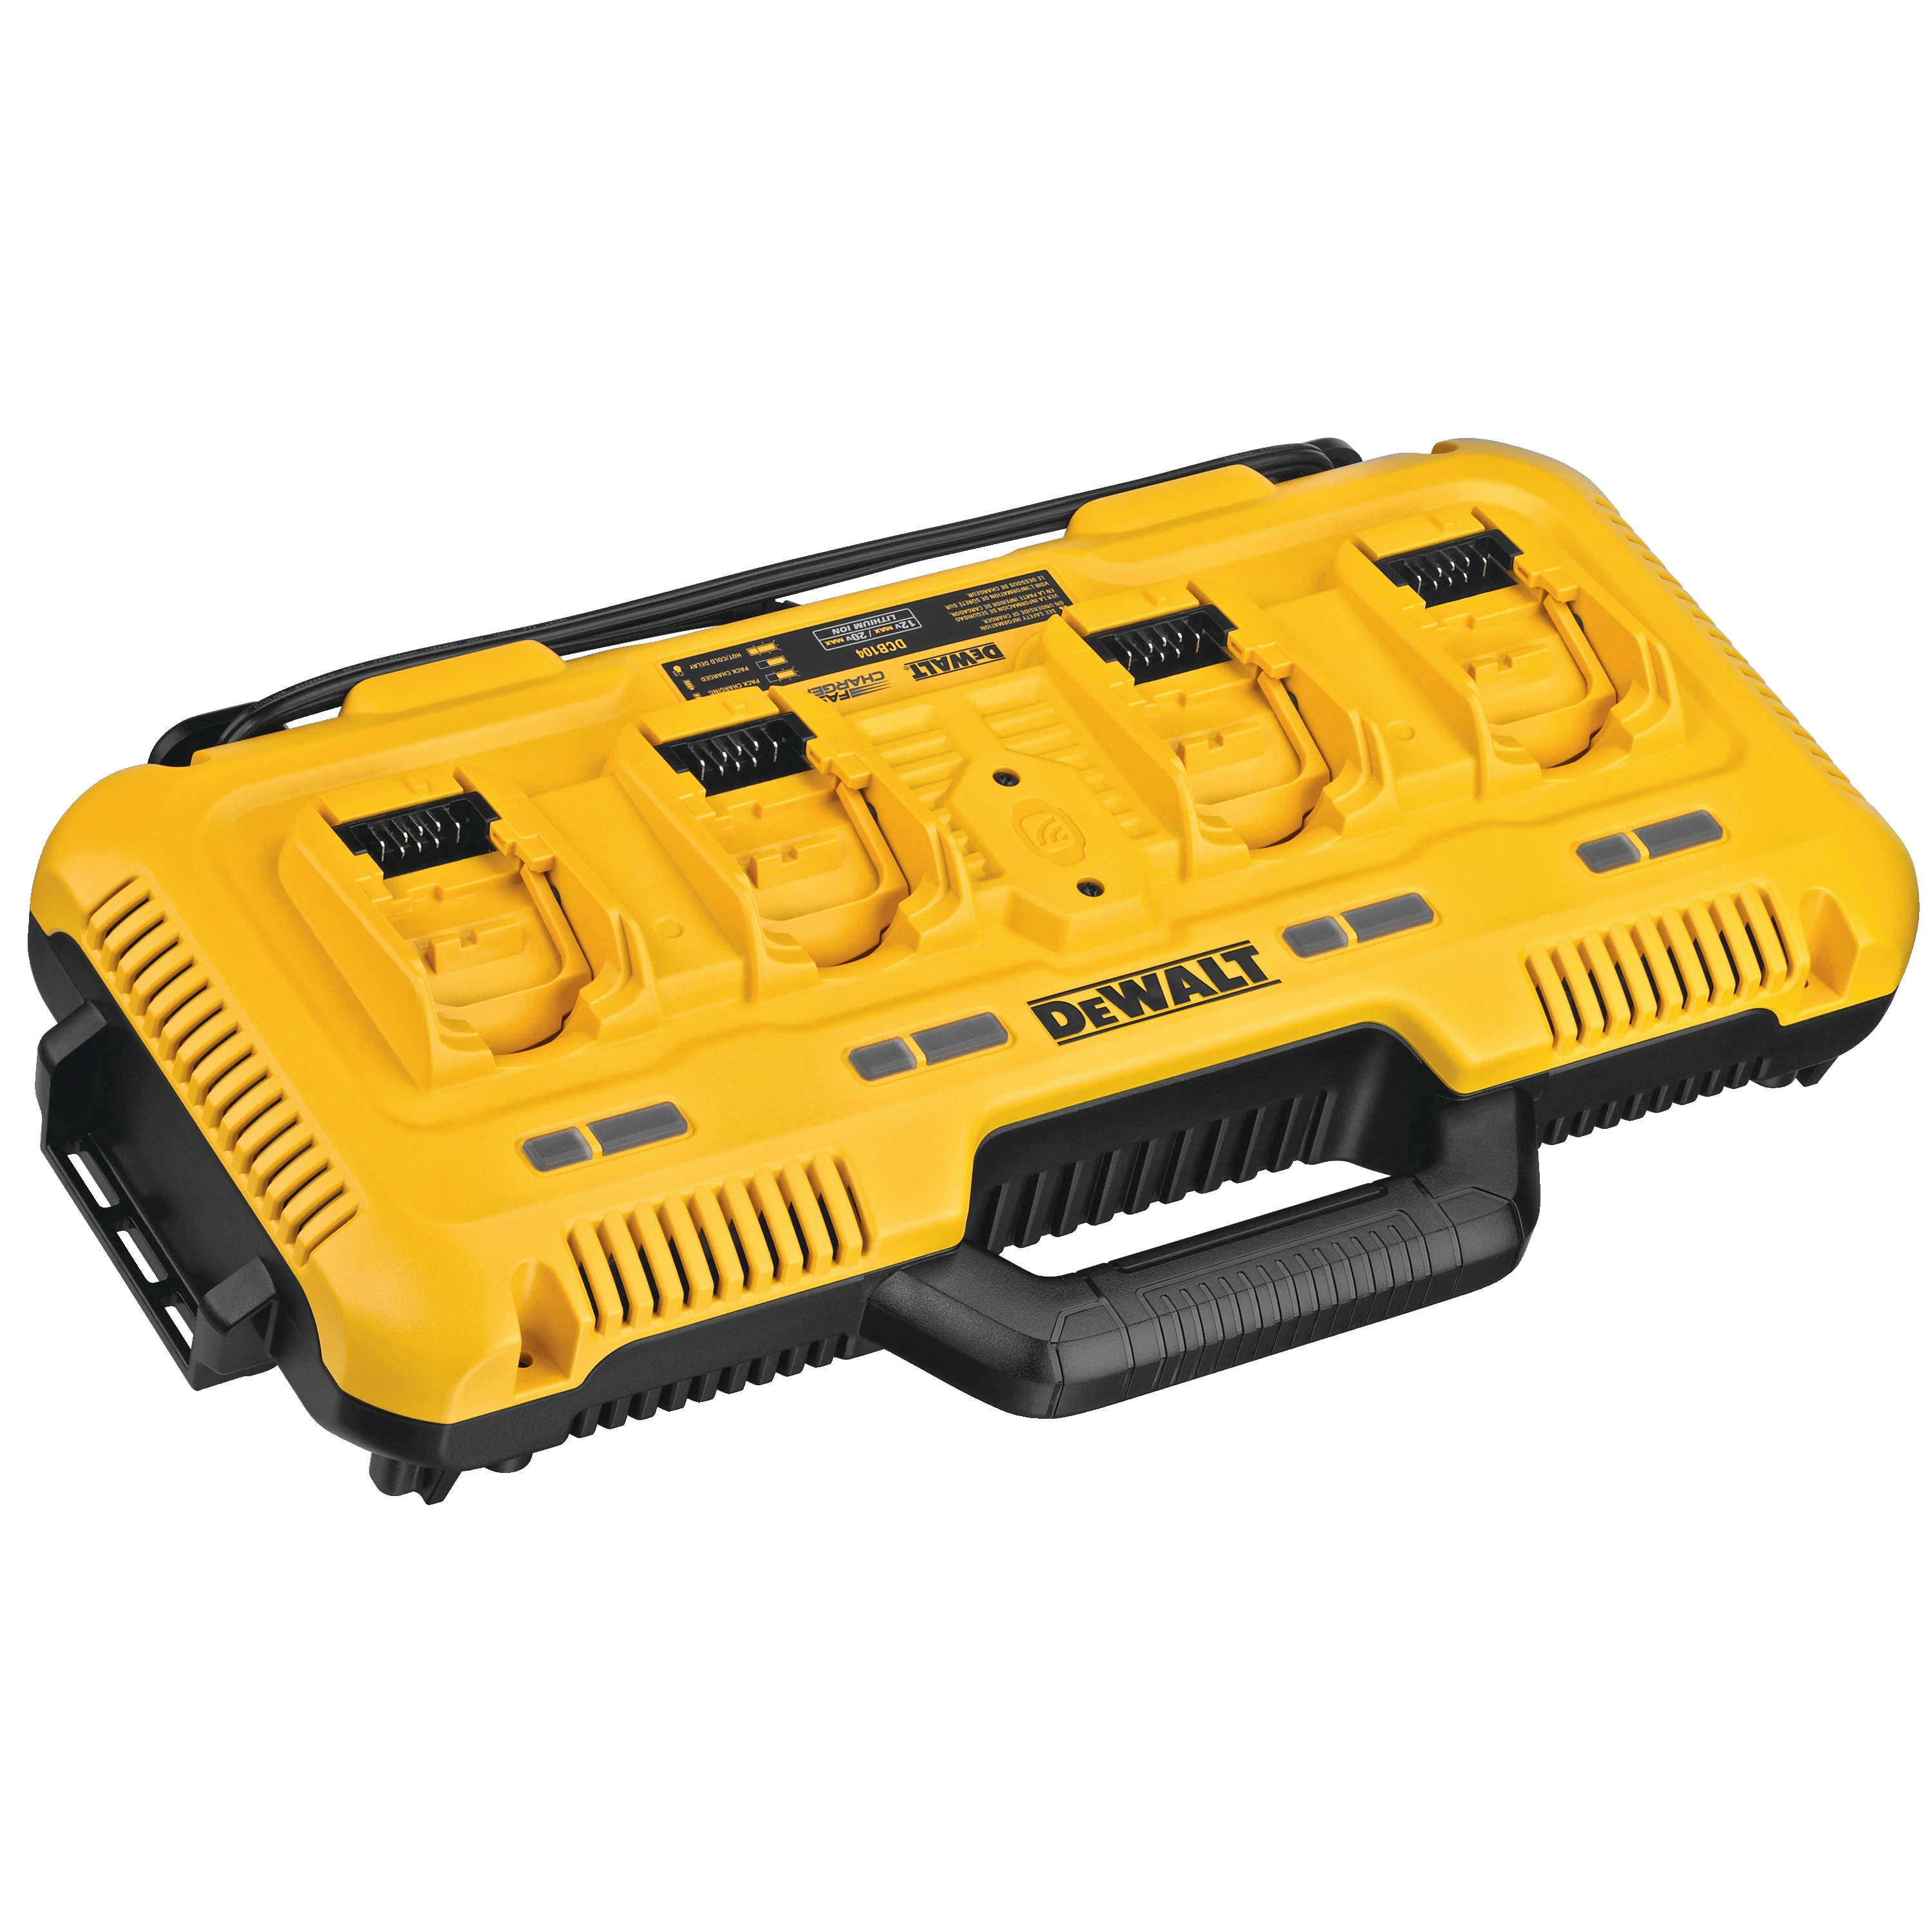 DeWalt Multiport Simultaneous Fast Charger - Utility and Pocket Knives